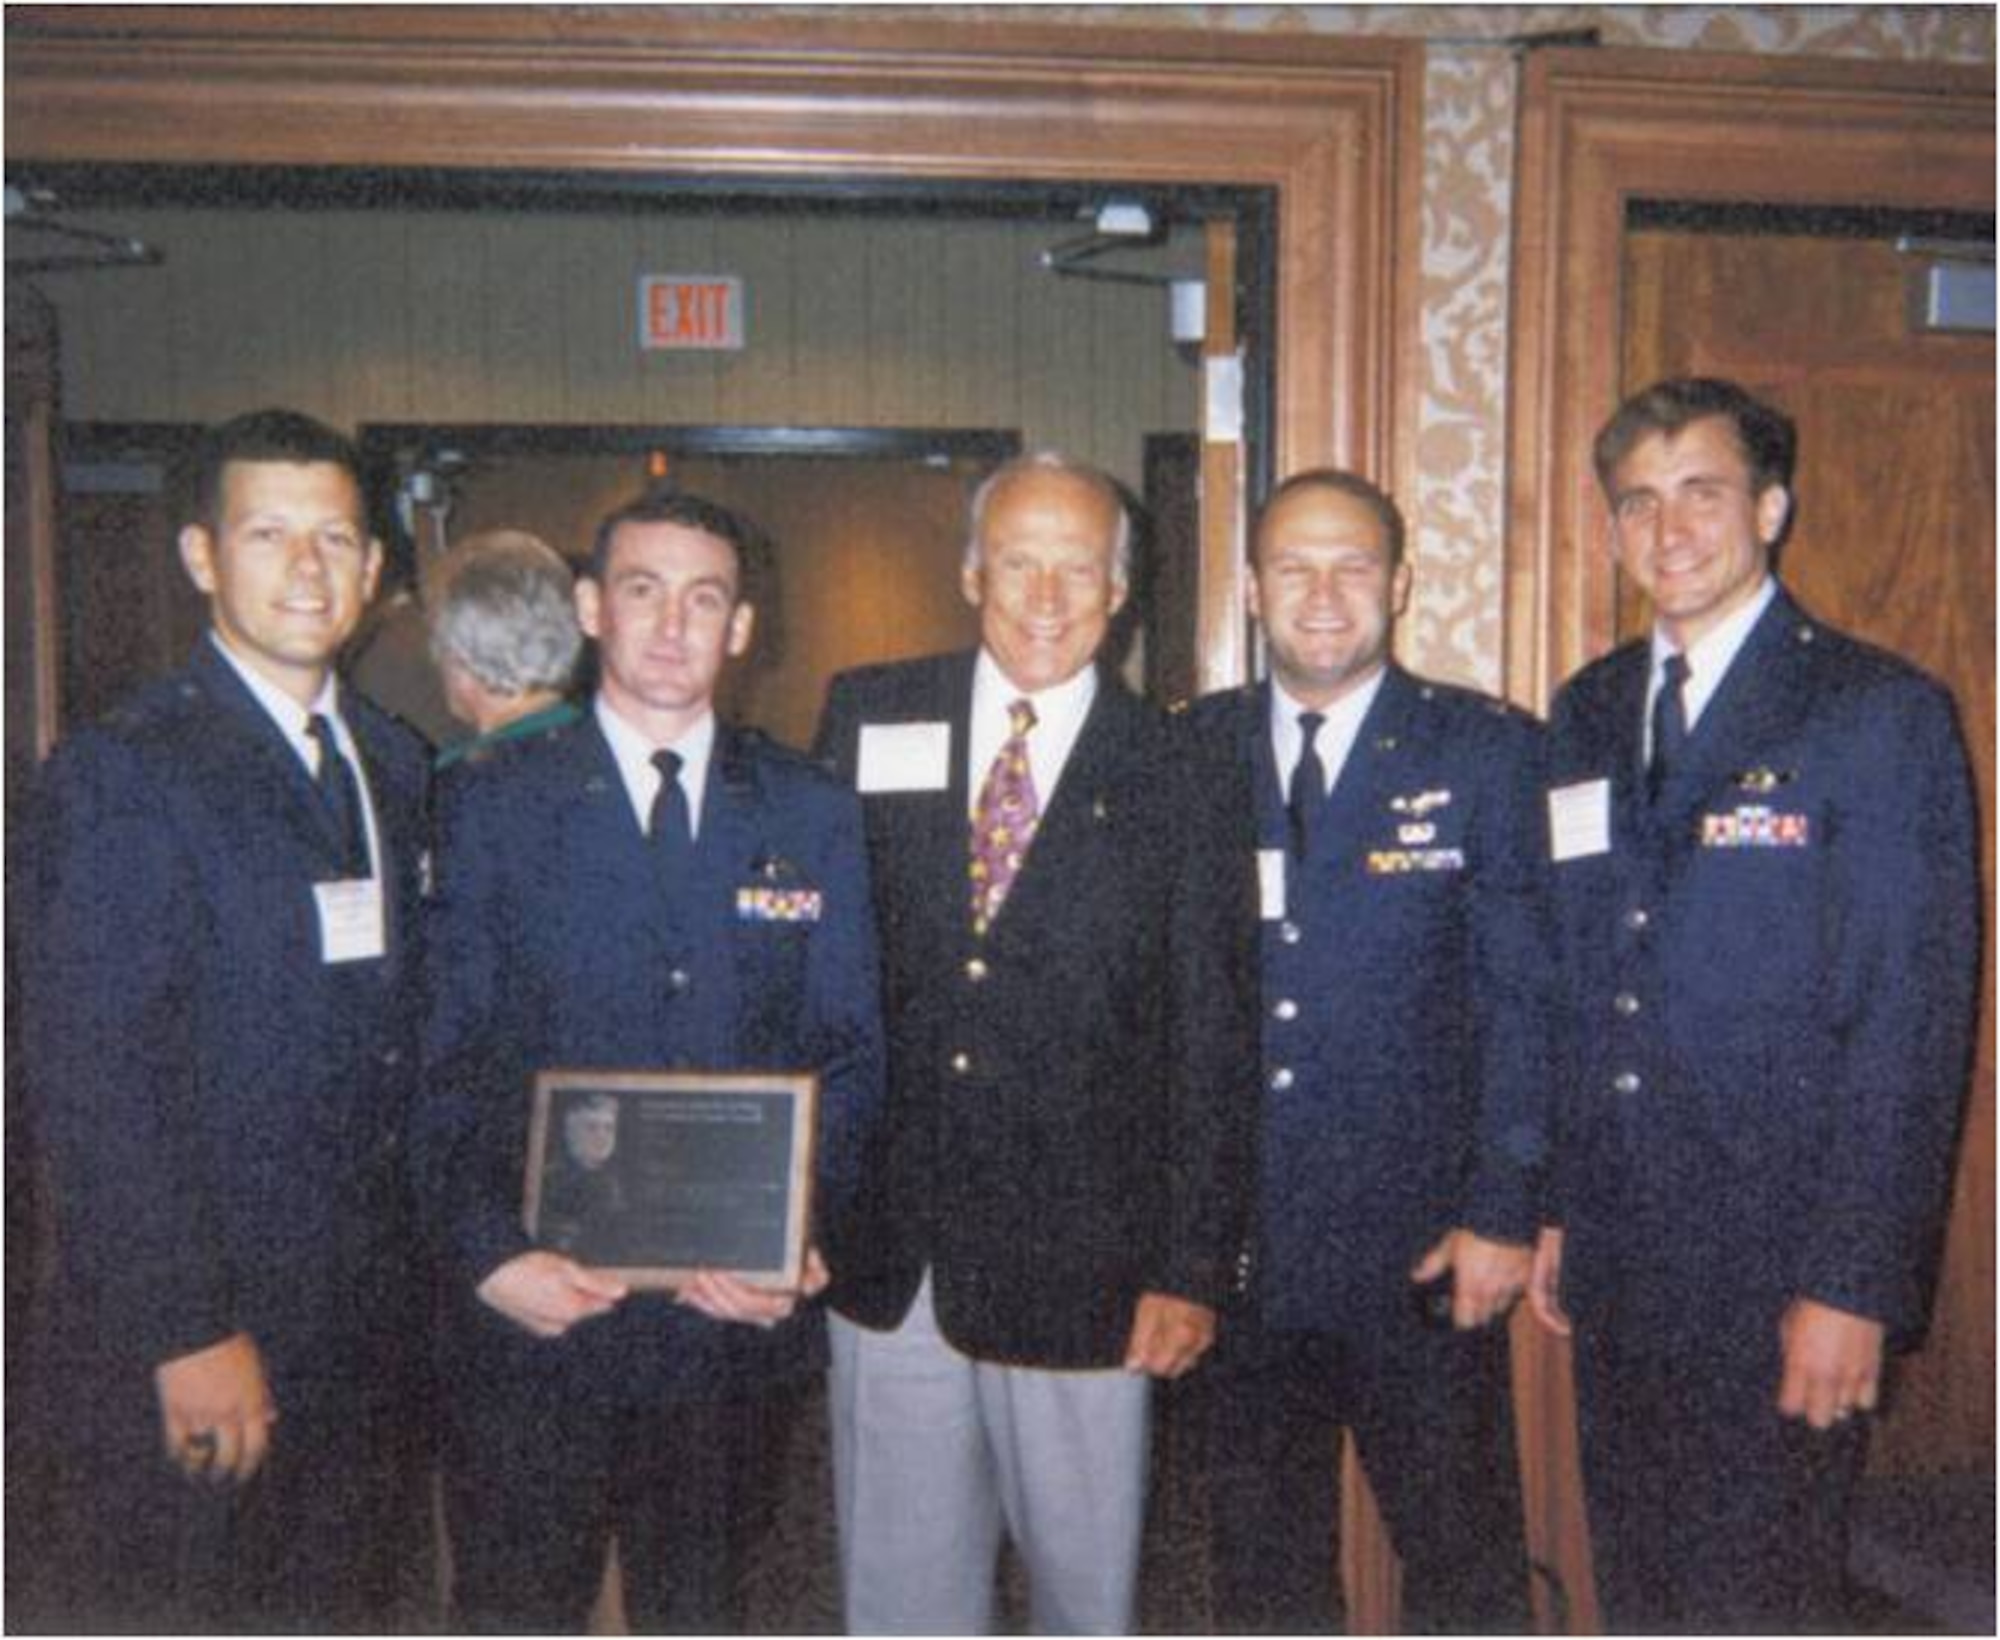 (From left to right) Capt. John Martin, Capt. Randy Kaufman, Apollo astronaut Buzz Aldrin, Capt. Joseph Reidy and Capt. Jeffrey Taliaferro gather after winning the Lemay Award for their work during Operation Desert Fox at the Air Force Association banquet in Washington, D.C., September 1999.